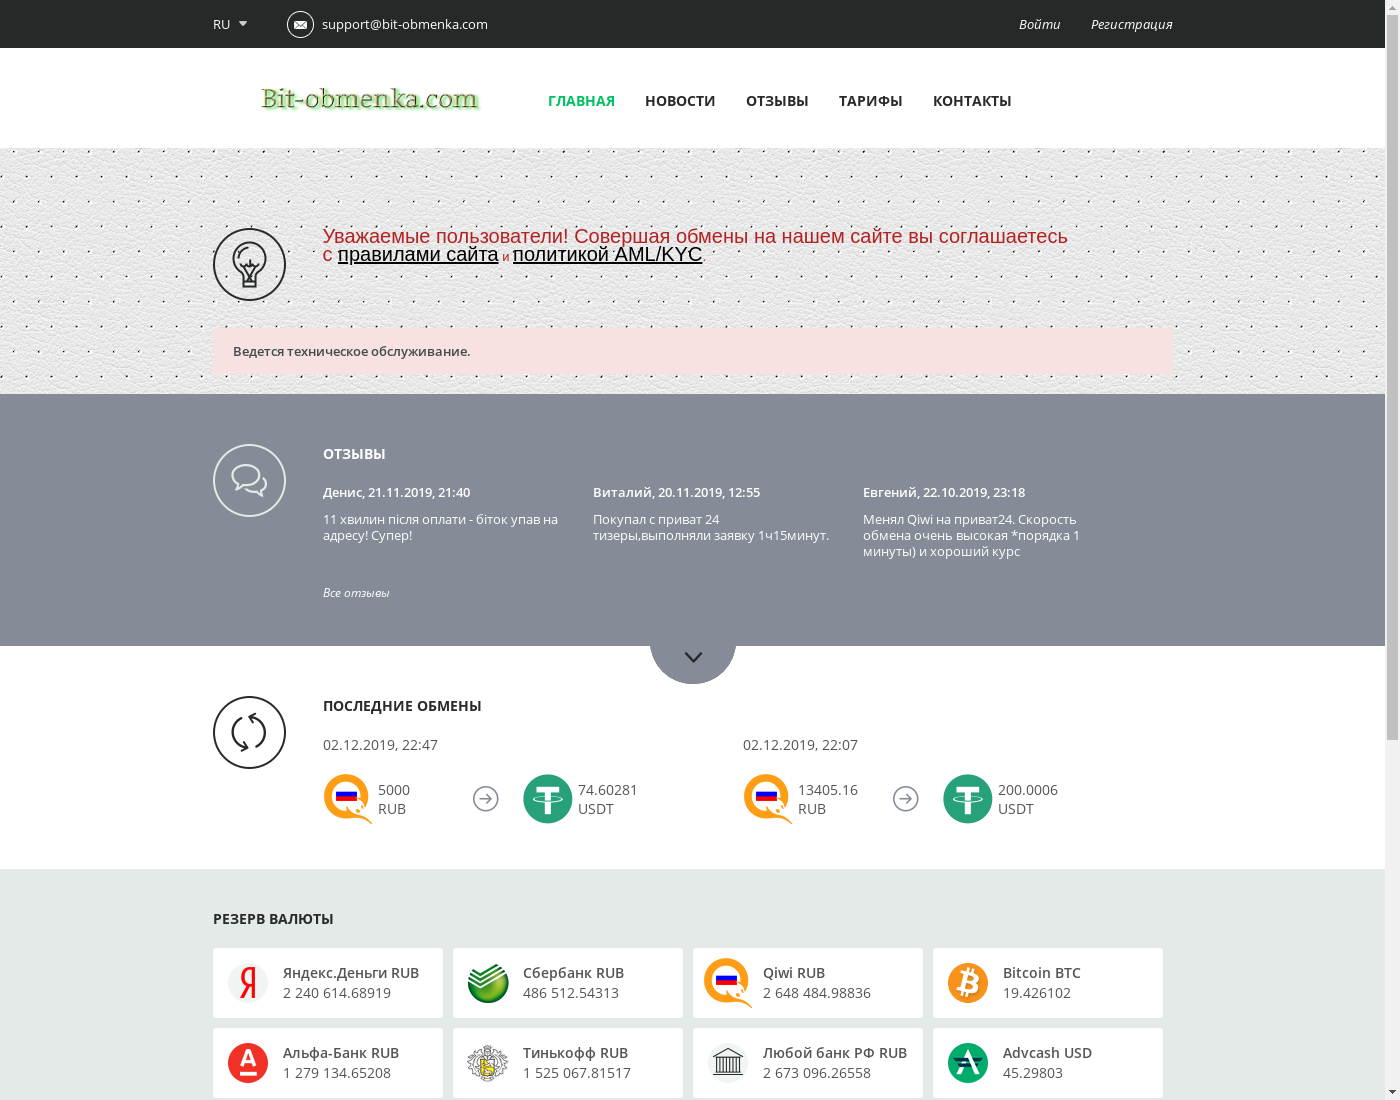 Bit-obmenka user interface: the home page in English